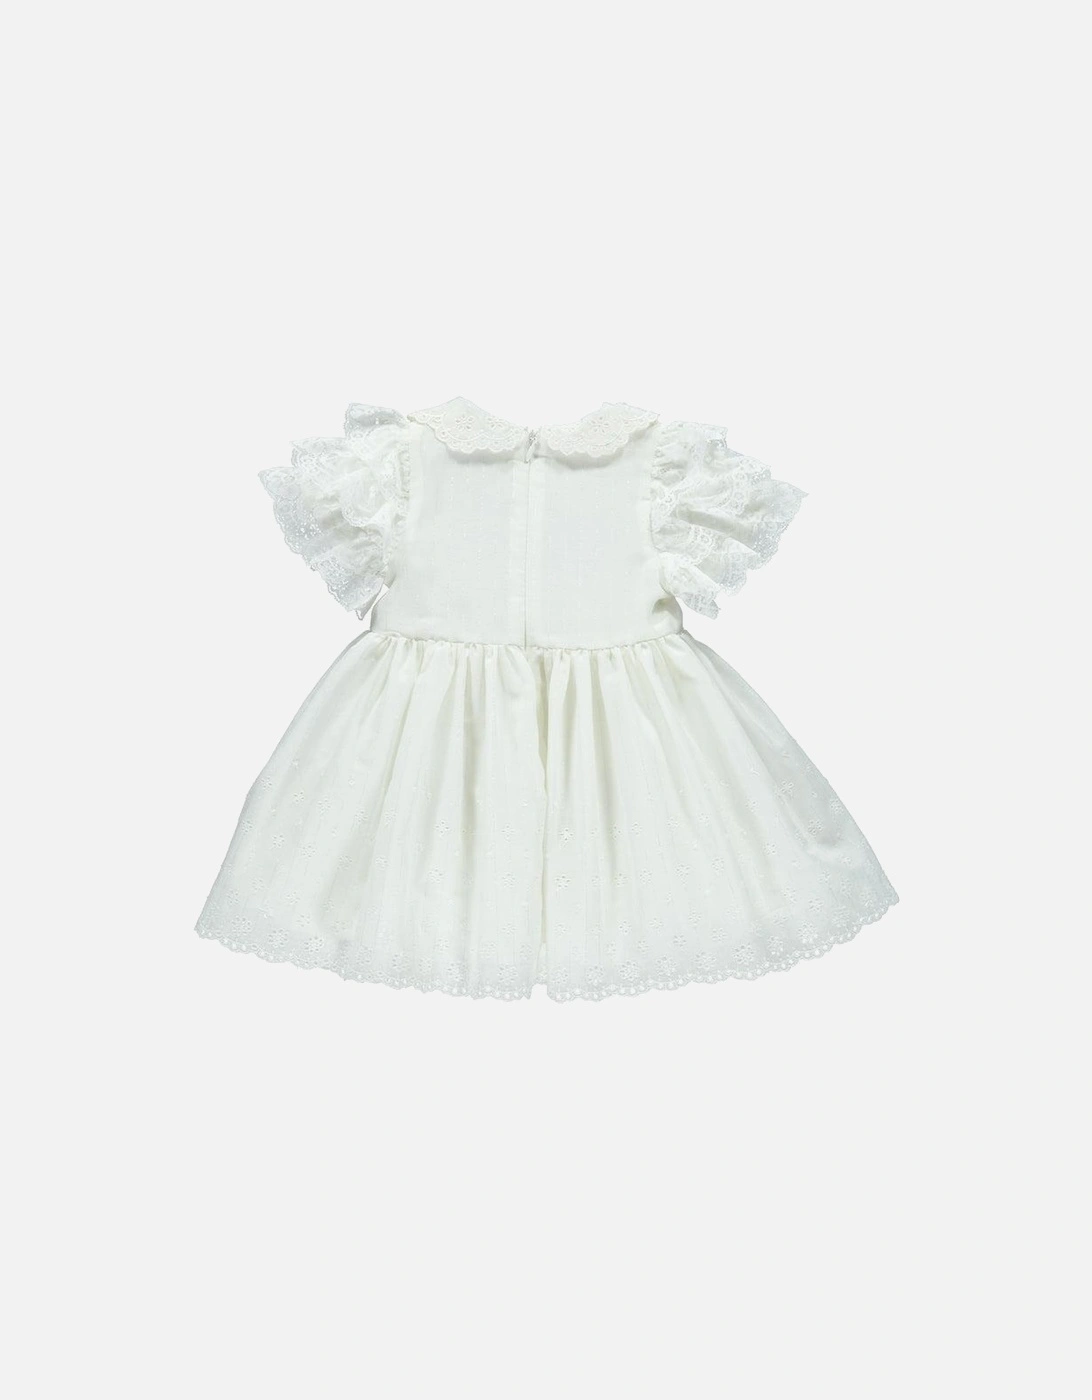 Girls Ivory Broderie Anglaise Dress